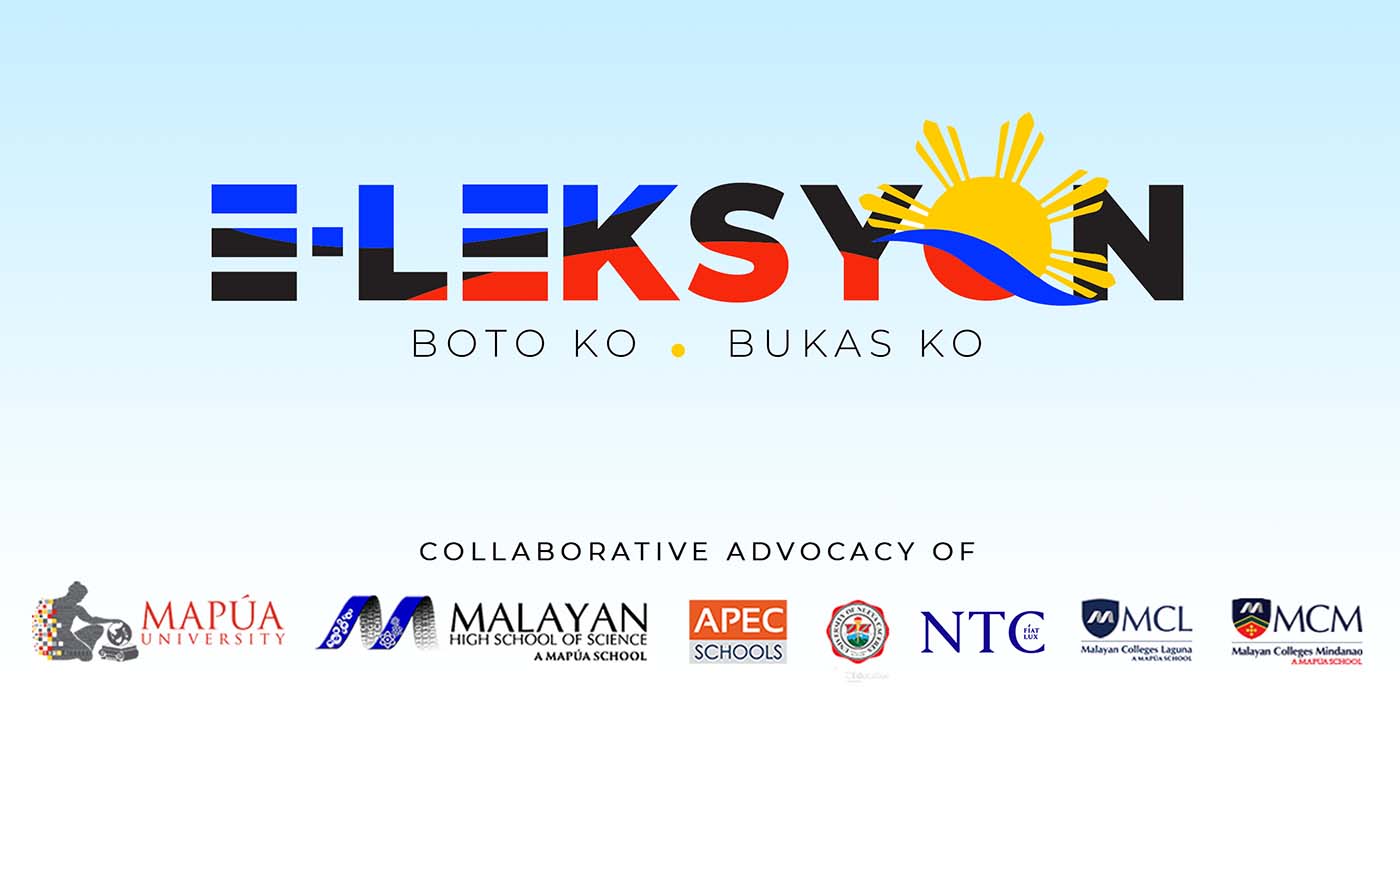 iPeople Schools encourage youth to register and vote through “E-Leksyon” campaign